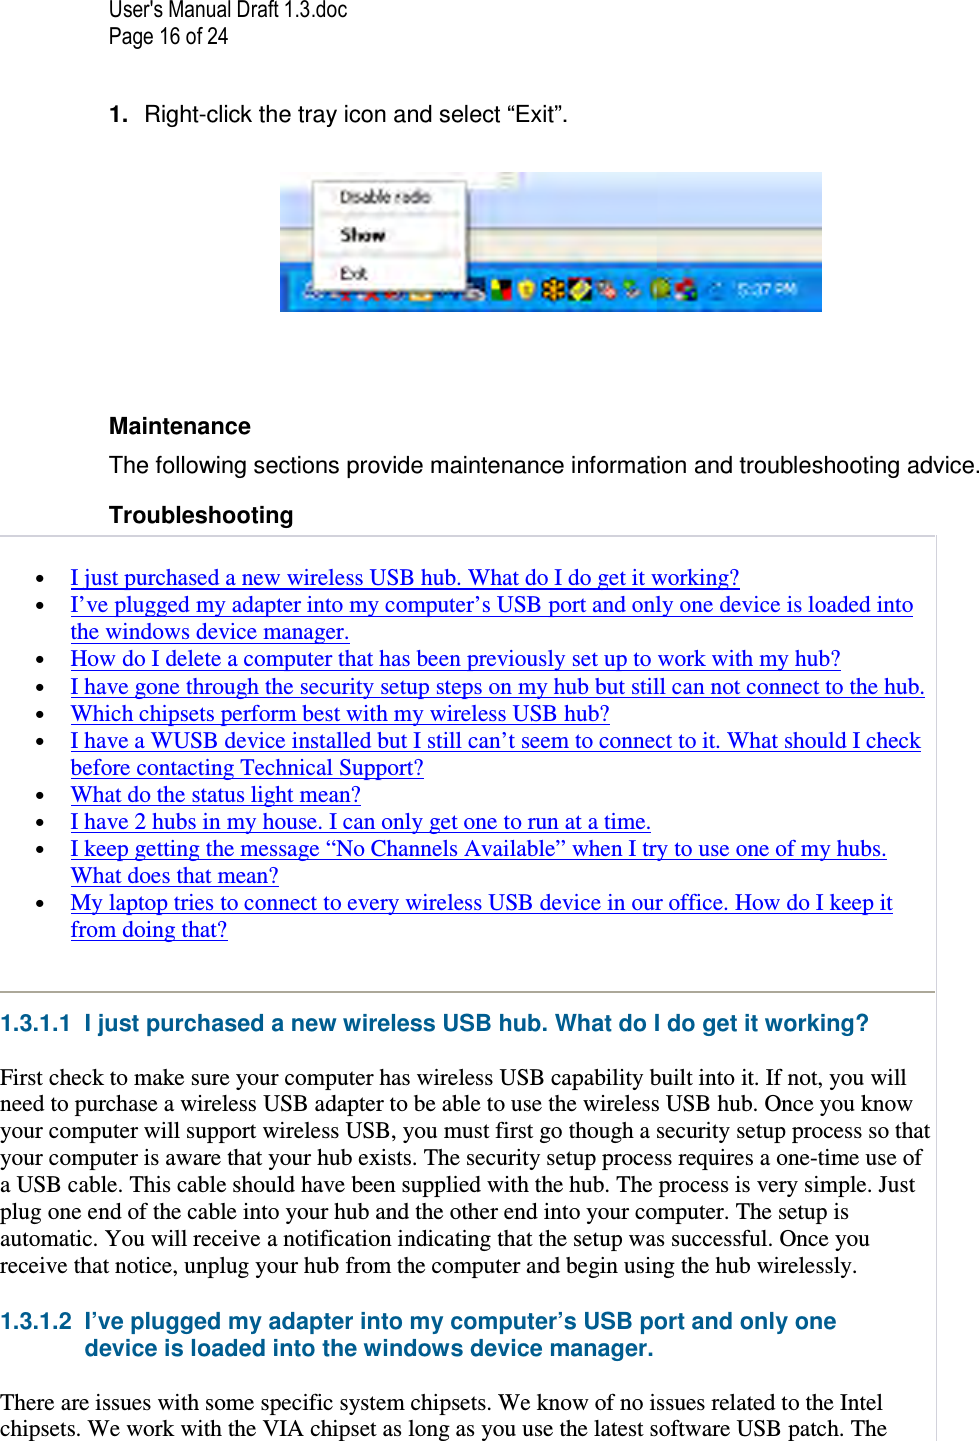 User&apos;s Manual Draft 1.3.doc Page 16 of 24 1.  Right-click the tray icon and select “Exit”.     Maintenance The following sections provide maintenance information and troubleshooting advice. Troubleshooting  • I just purchased a new wireless USB hub. What do I do get it working?  • I’ve plugged my adapter into my computer’s USB port and only one device is loaded into the windows device manager.  • How do I delete a computer that has been previously set up to work with my hub?  • I have gone through the security setup steps on my hub but still can not connect to the hub.  • Which chipsets perform best with my wireless USB hub?  • I have a WUSB device installed but I still can’t seem to connect to it. What should I check before contacting Technical Support?  • What do the status light mean?  • I have 2 hubs in my house. I can only get one to run at a time.  • I keep getting the message “No Channels Available” when I try to use one of my hubs. What does that mean?  • My laptop tries to connect to every wireless USB device in our office. How do I keep it from doing that?  1.3.1.1  I just purchased a new wireless USB hub. What do I do get it working? First check to make sure your computer has wireless USB capability built into it. If not, you will need to purchase a wireless USB adapter to be able to use the wireless USB hub. Once you know your computer will support wireless USB, you must first go though a security setup process so that your computer is aware that your hub exists. The security setup process requires a one-time use of a USB cable. This cable should have been supplied with the hub. The process is very simple. Just plug one end of the cable into your hub and the other end into your computer. The setup is automatic. You will receive a notification indicating that the setup was successful. Once you receive that notice, unplug your hub from the computer and begin using the hub wirelessly. 1.3.1.2  I’ve plugged my adapter into my computer’s USB port and only one device is loaded into the windows device manager. There are issues with some specific system chipsets. We know of no issues related to the Intel chipsets. We work with the VIA chipset as long as you use the latest software USB patch. The 